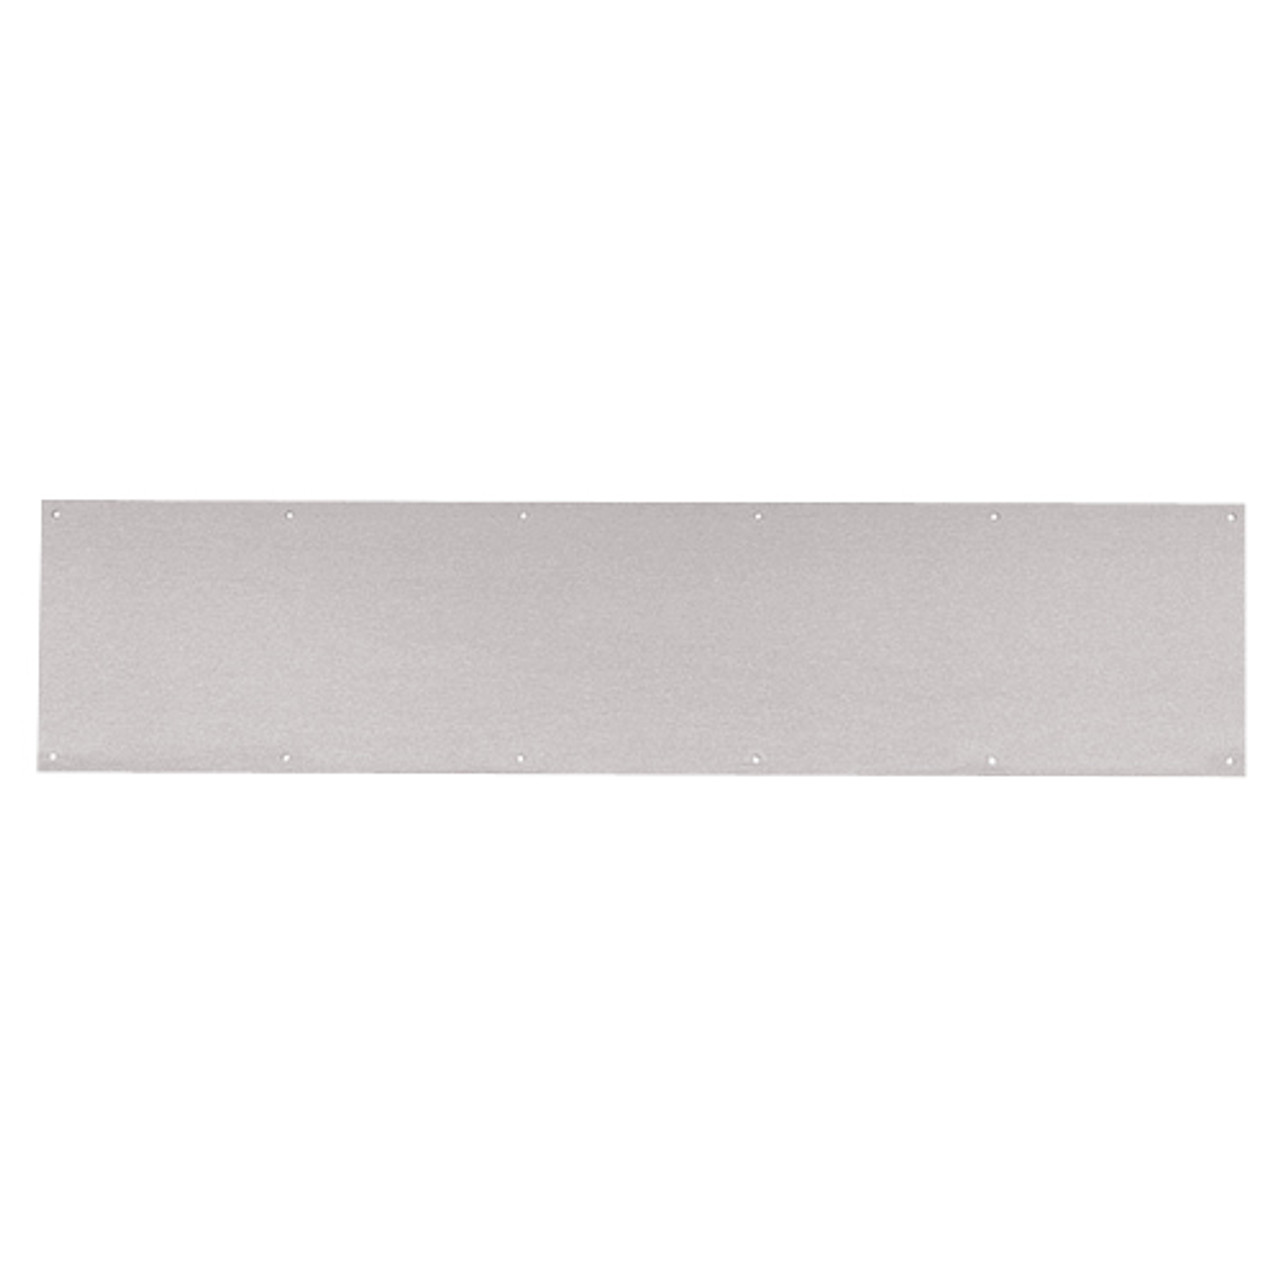 8400-US32D-32x38-B-CS Ives 8400 Series Protection Plate in Satin Stainless Steel